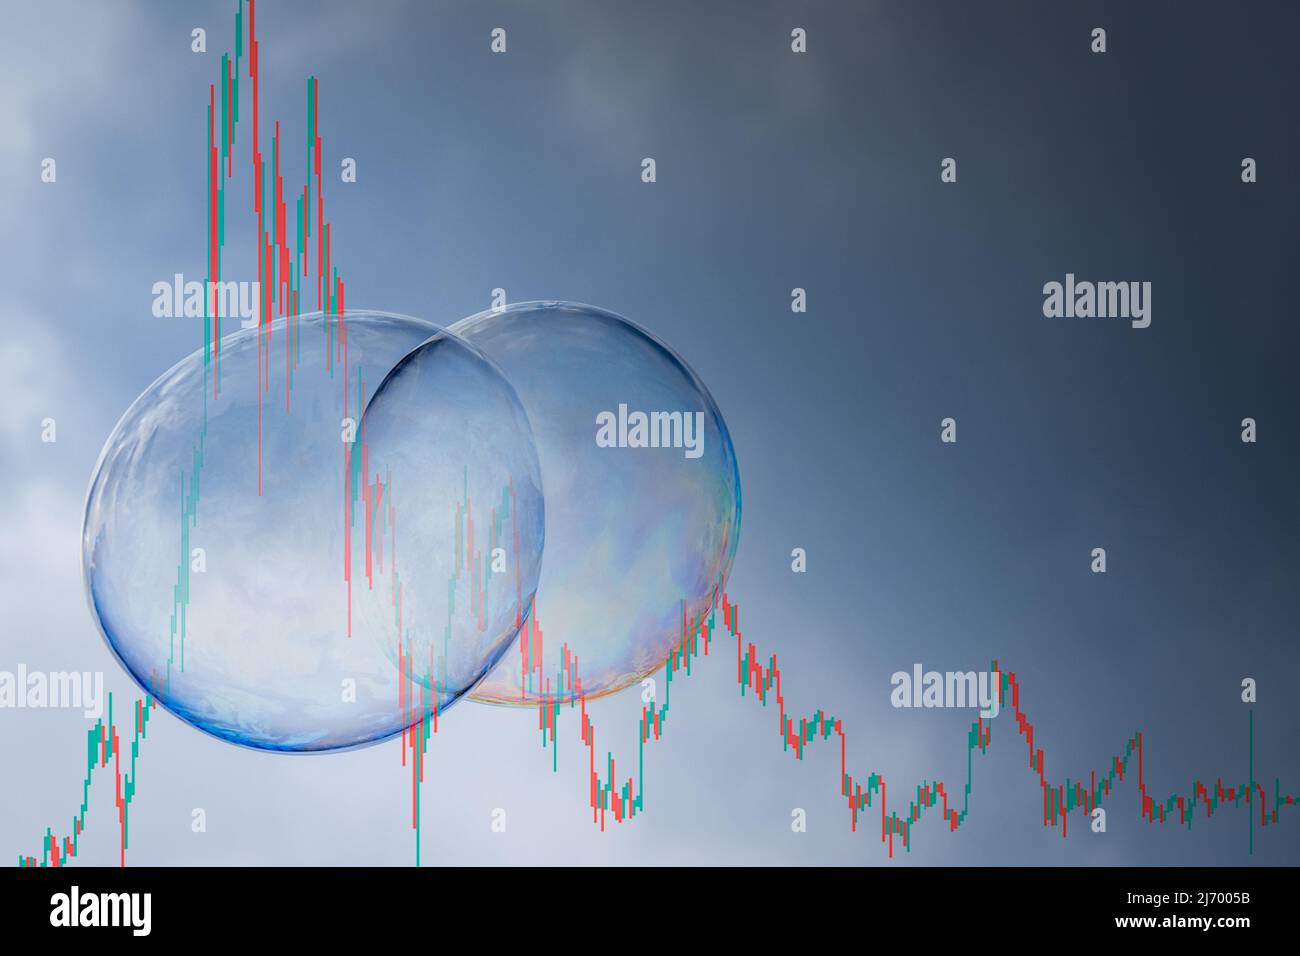 symbolic picture of a stock market bubble with a parabolic chart entering a recession with finishing its market cycle with a financial tsunami. Stock Photo